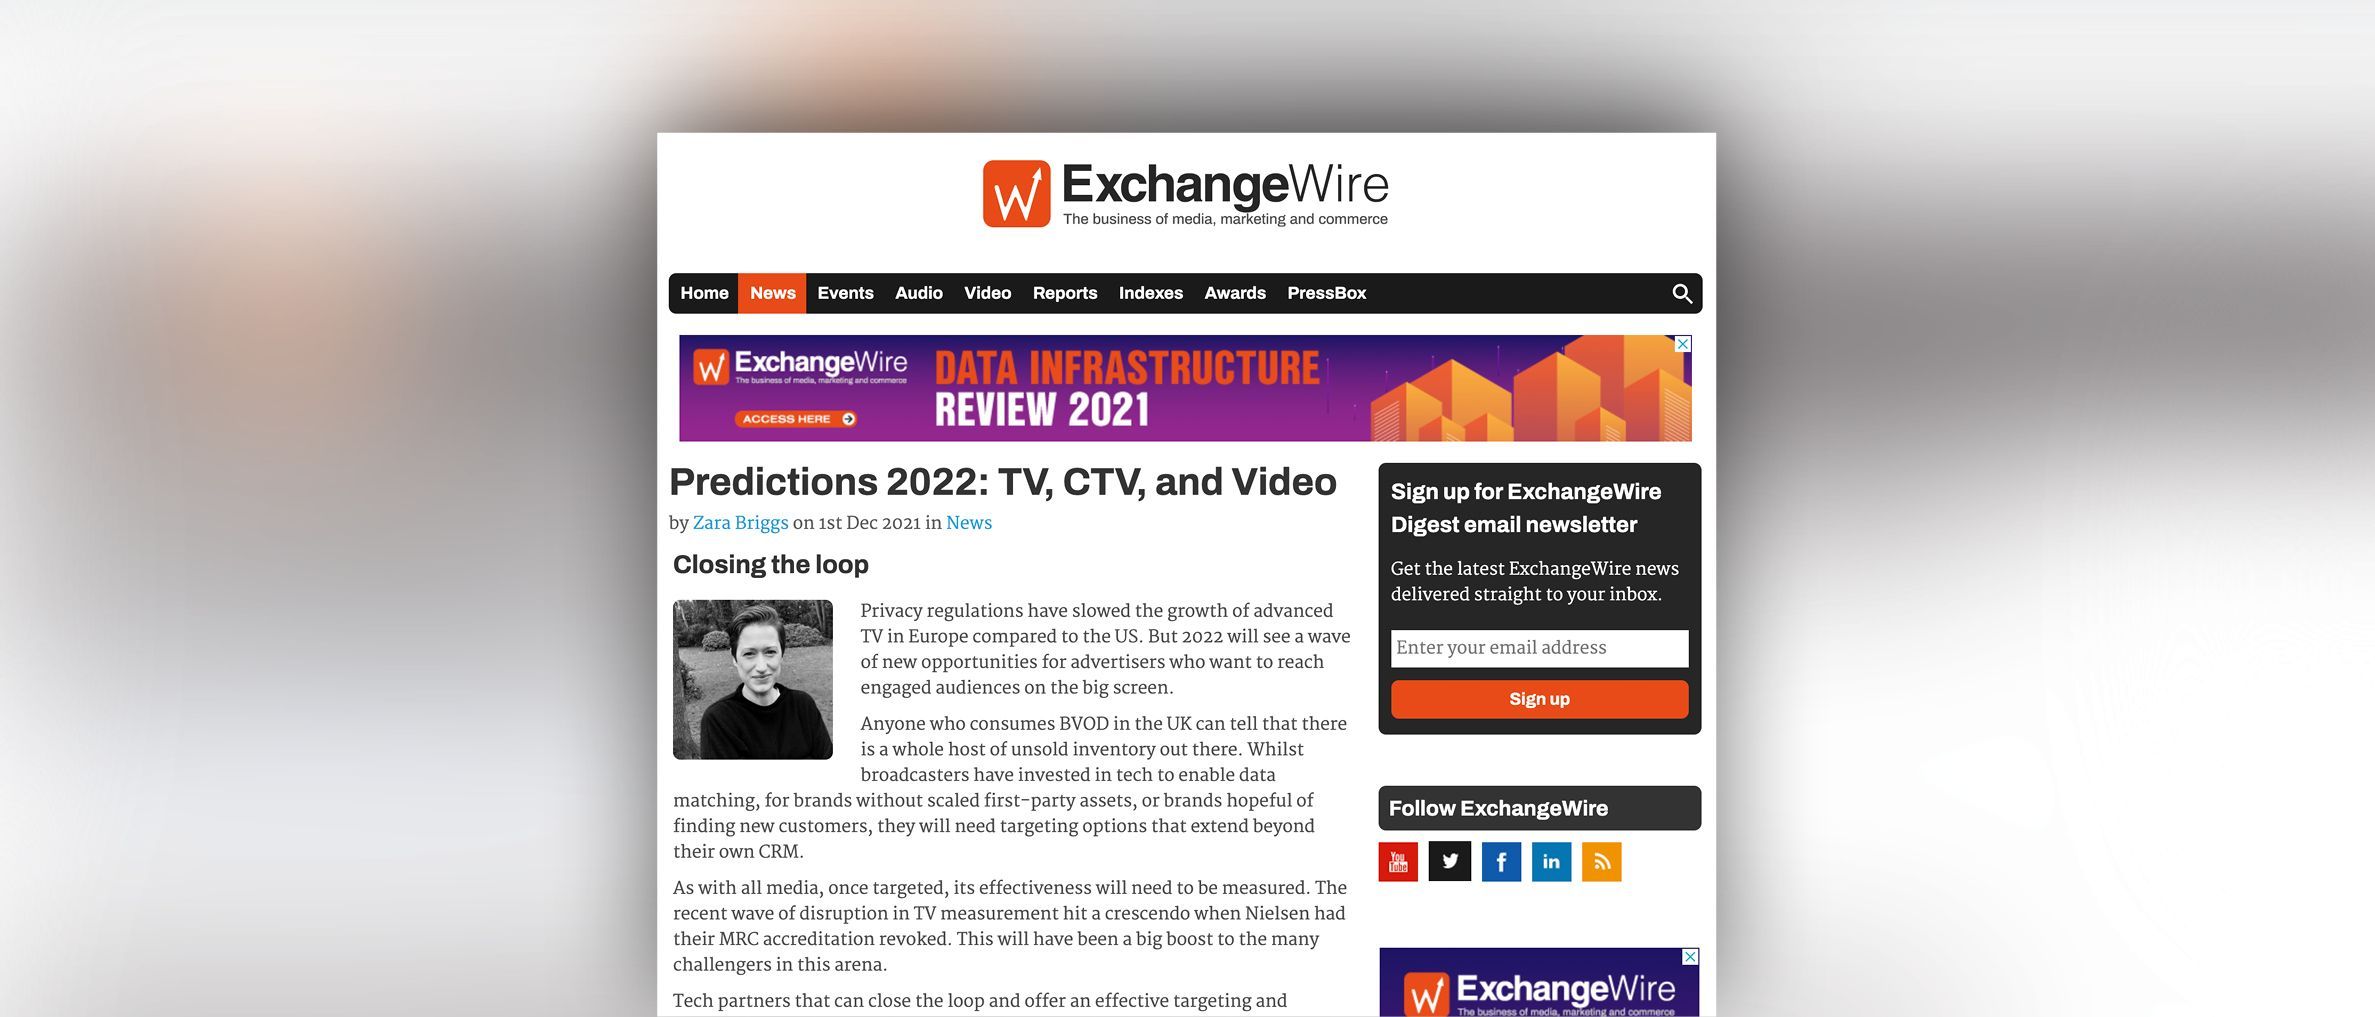 ExchangeWire: Captify’s Global VP of Product, Amelia Waddington Shares Her 2022 TV, CTV, and Video Predictions